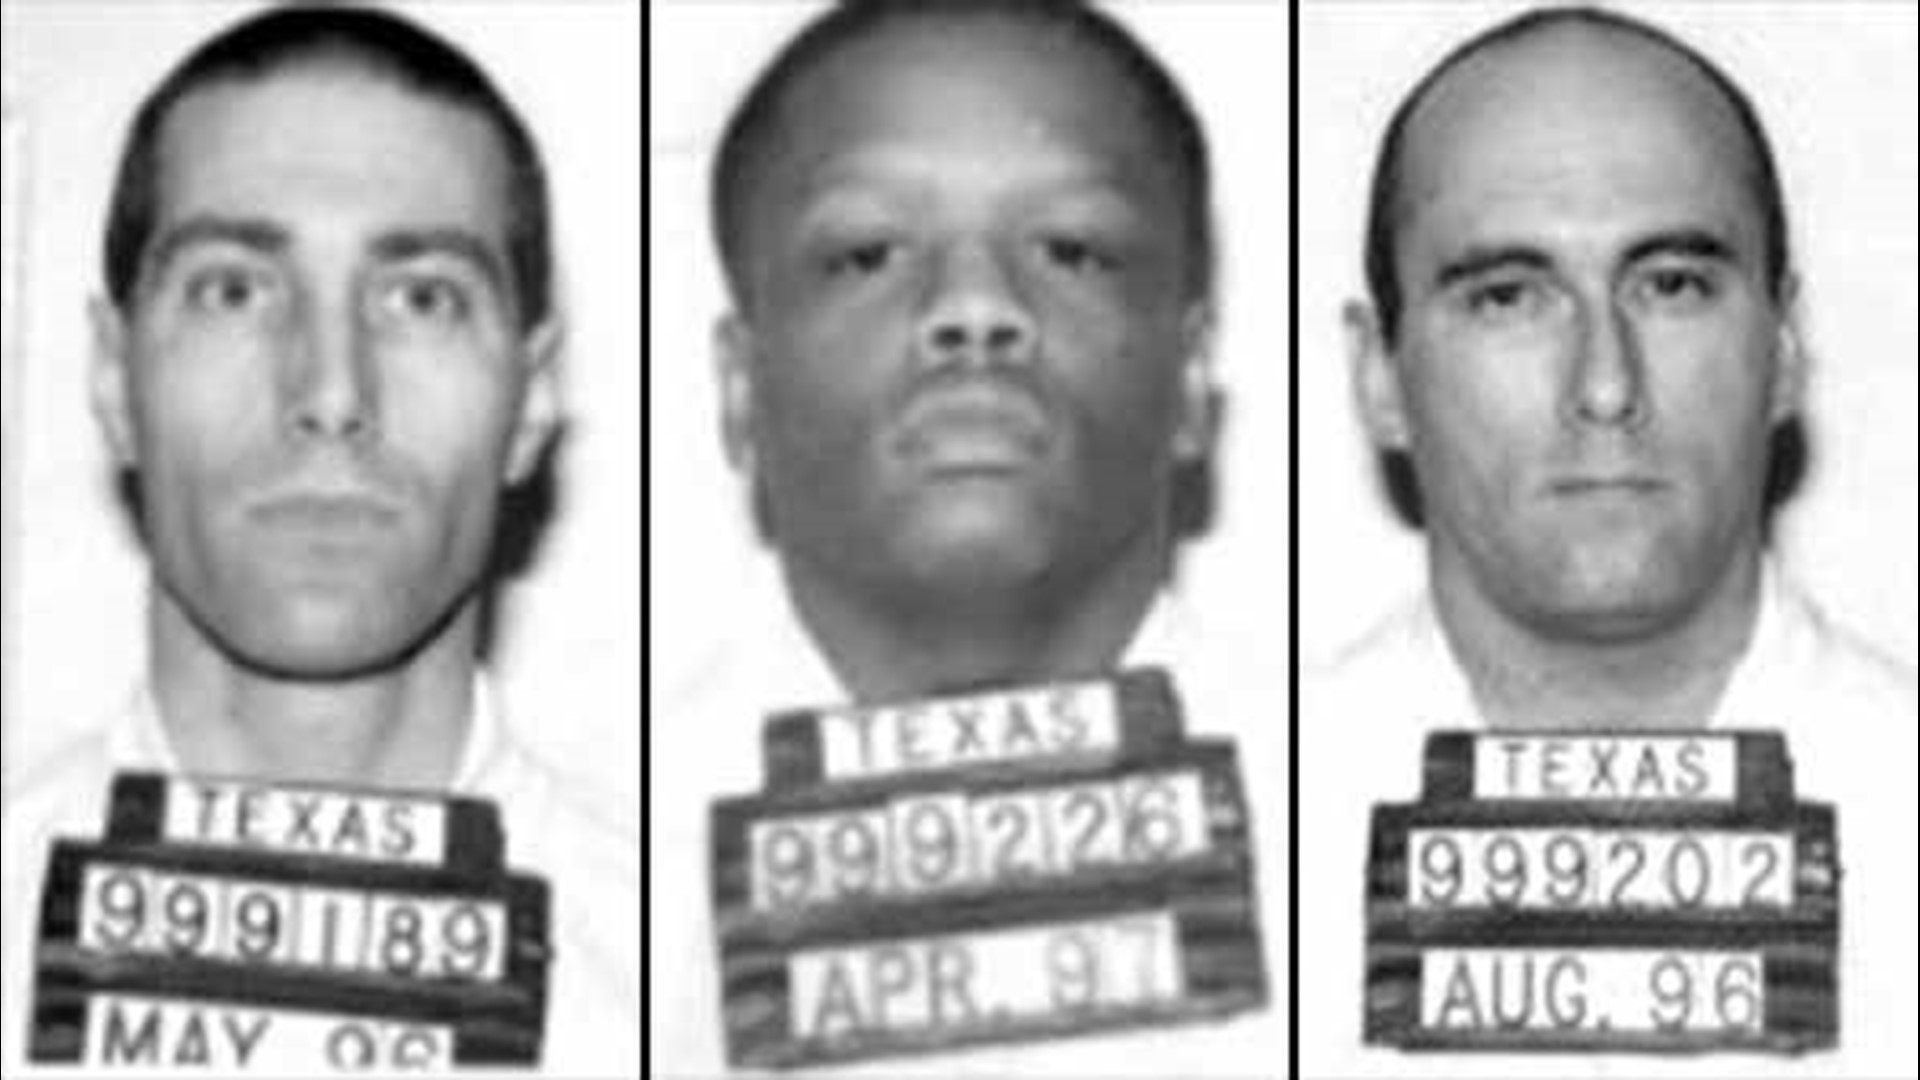 There were two other men convicted in the 1994 murder of Farah Fratta. Howard Guidry and Joseph Prystash both remain on death row.